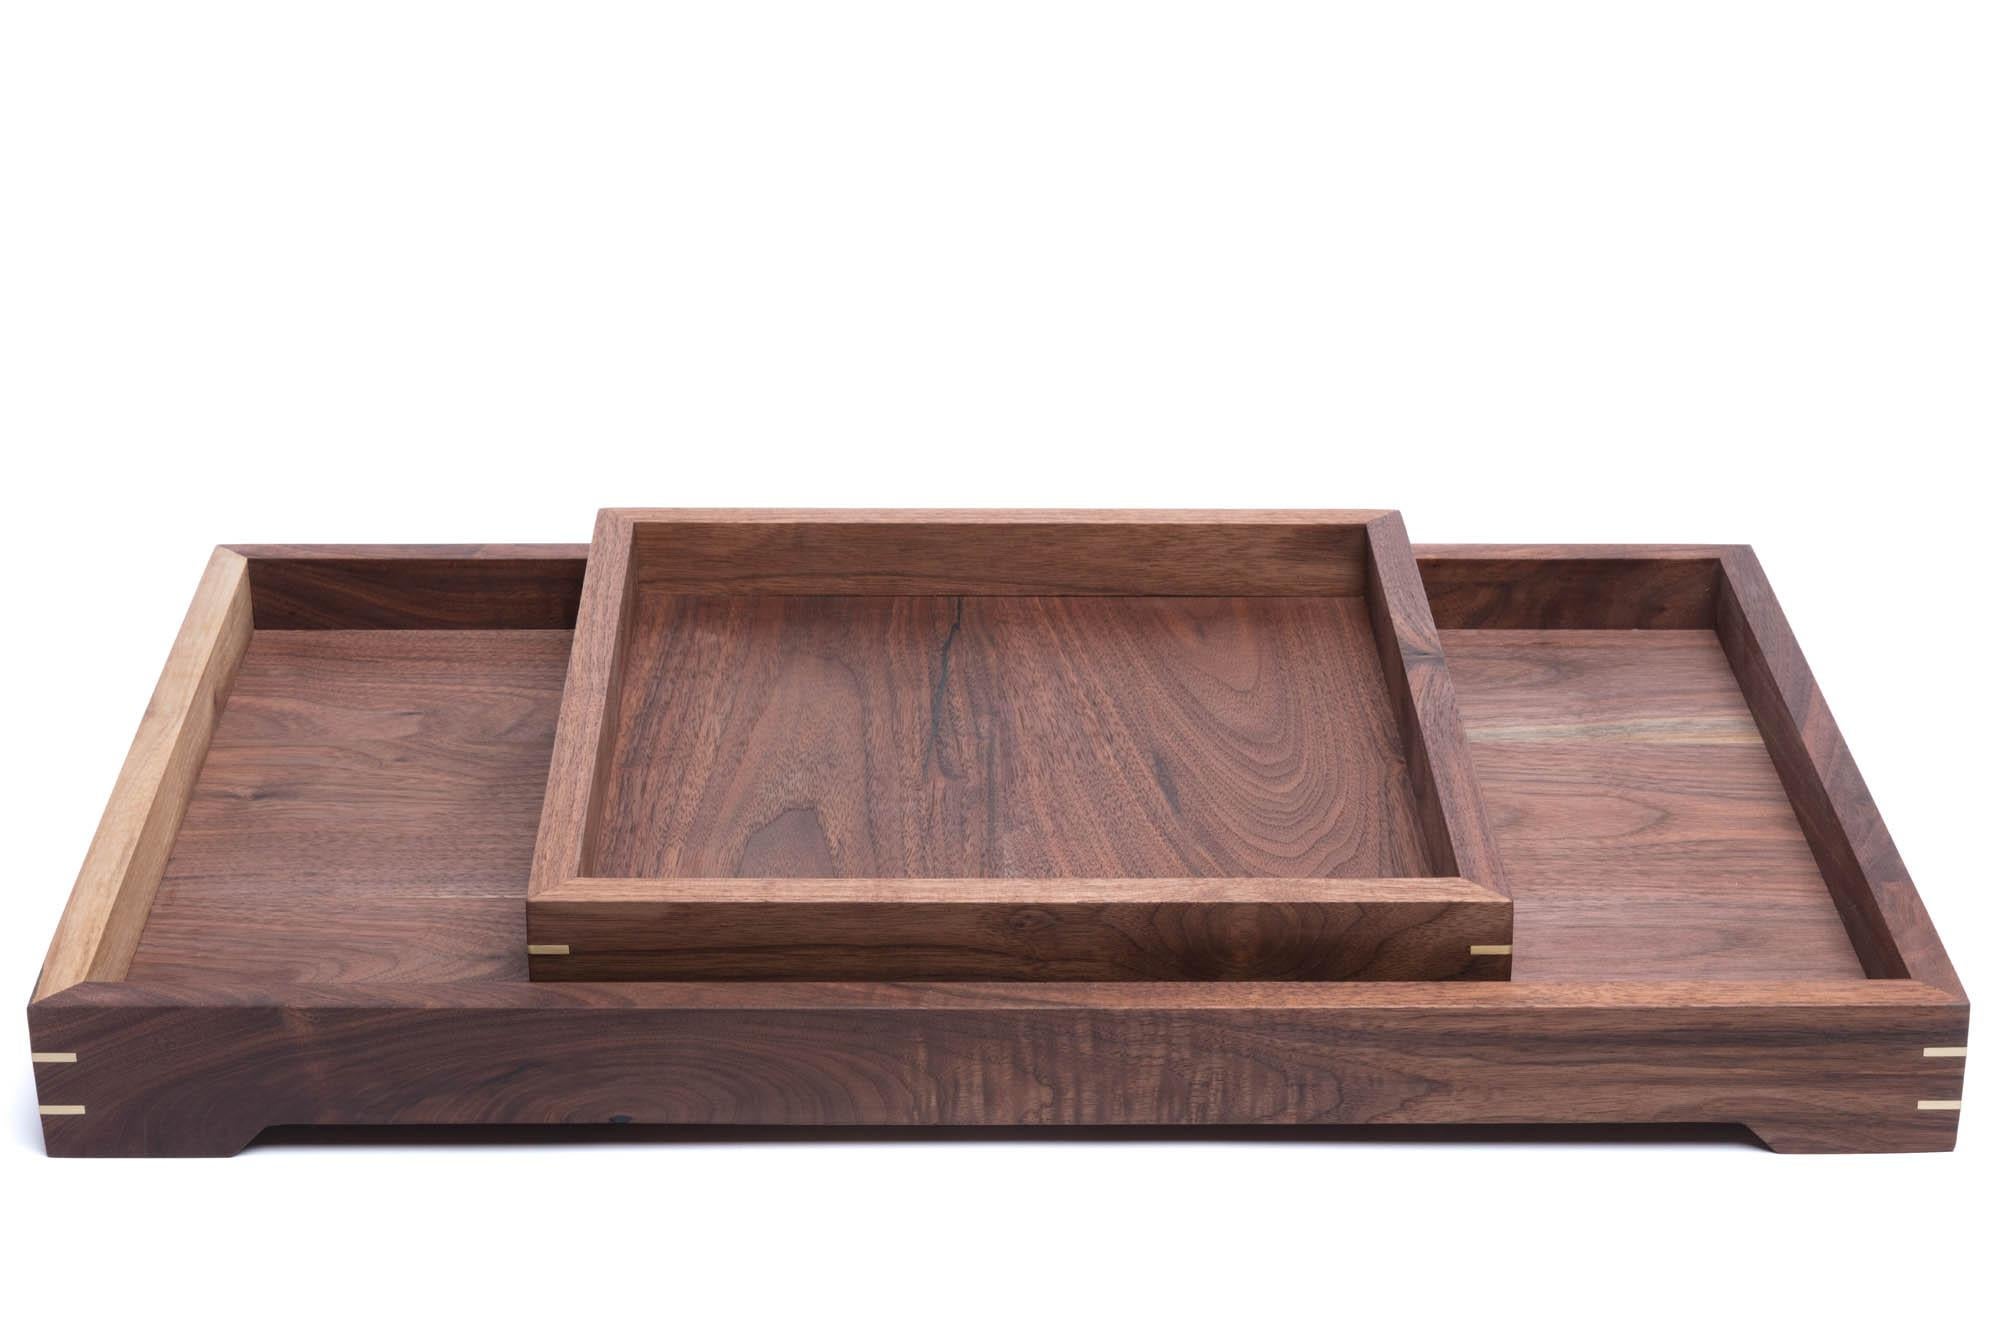 Contemporary Small Walnut Wood and Brass Tray for Barware or Display by Alabama Sawyer